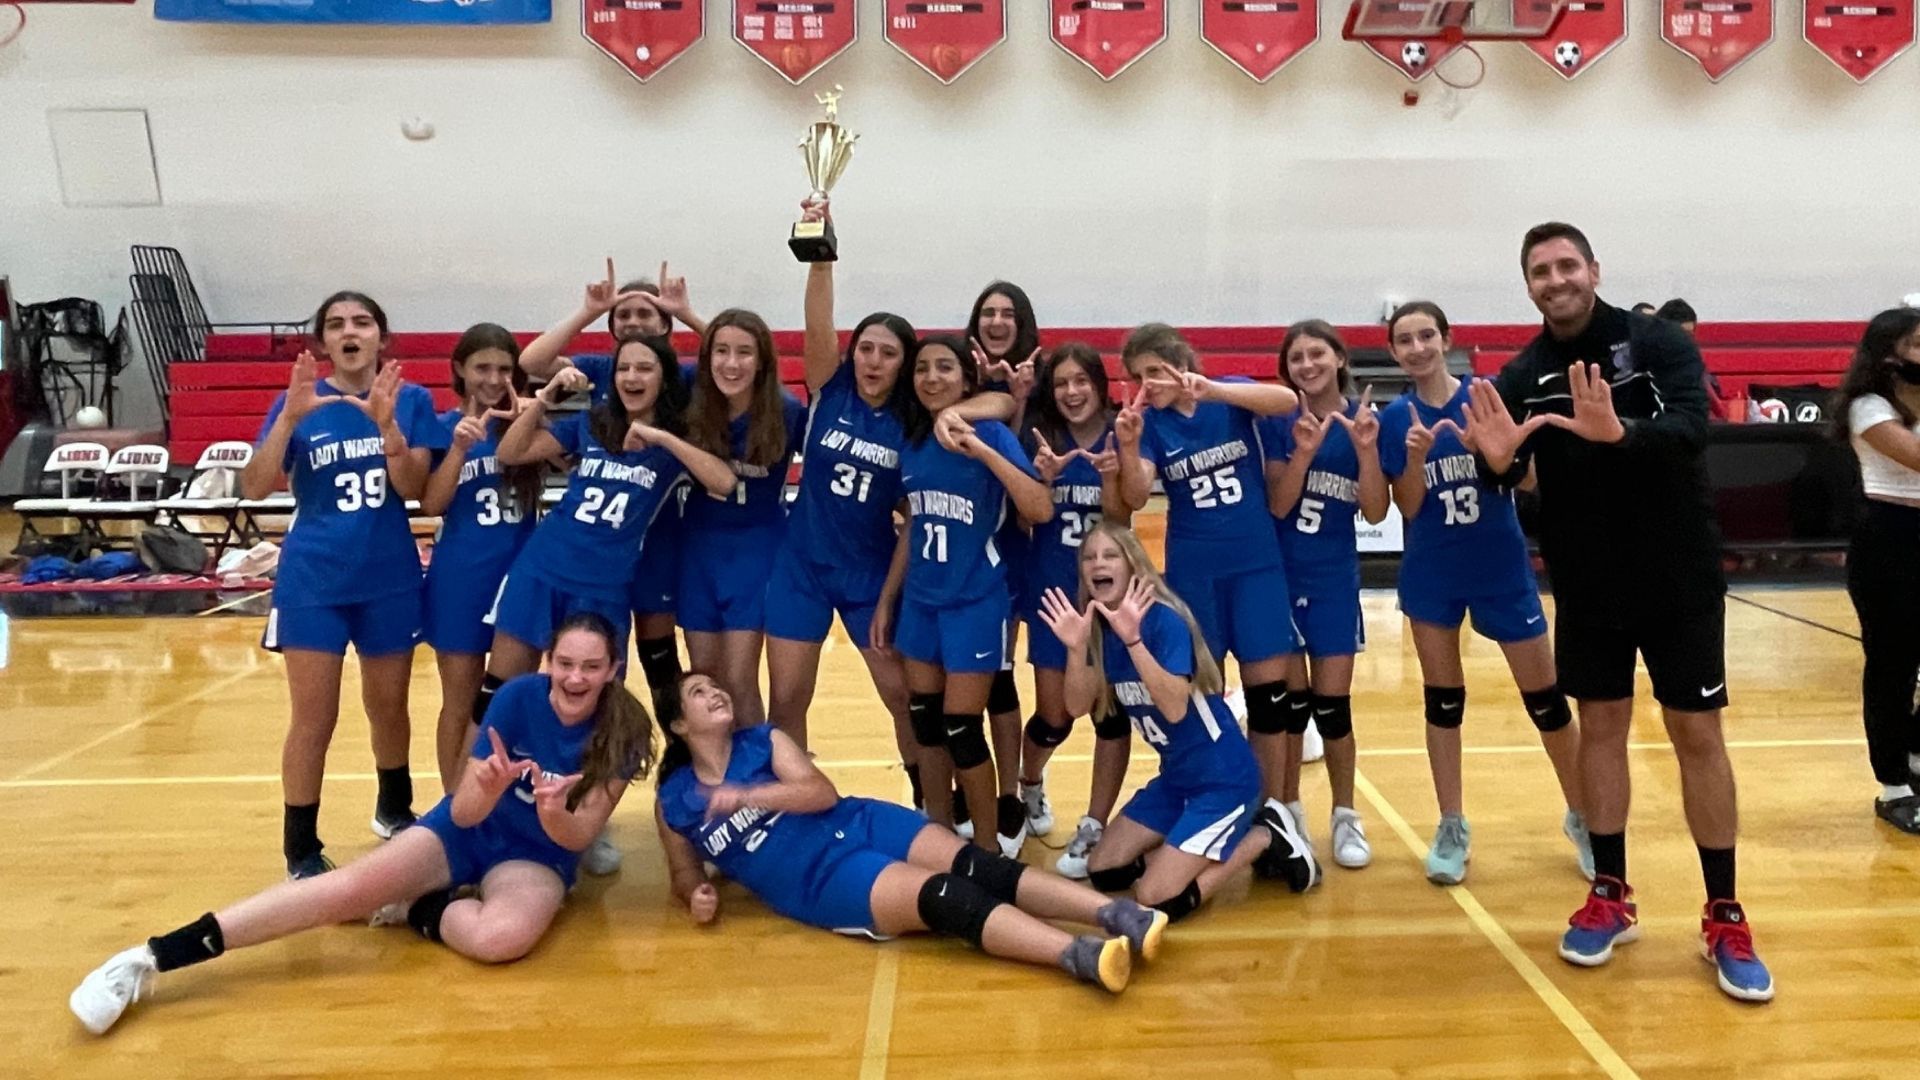 A volleyball team poses for a picture with a trophy